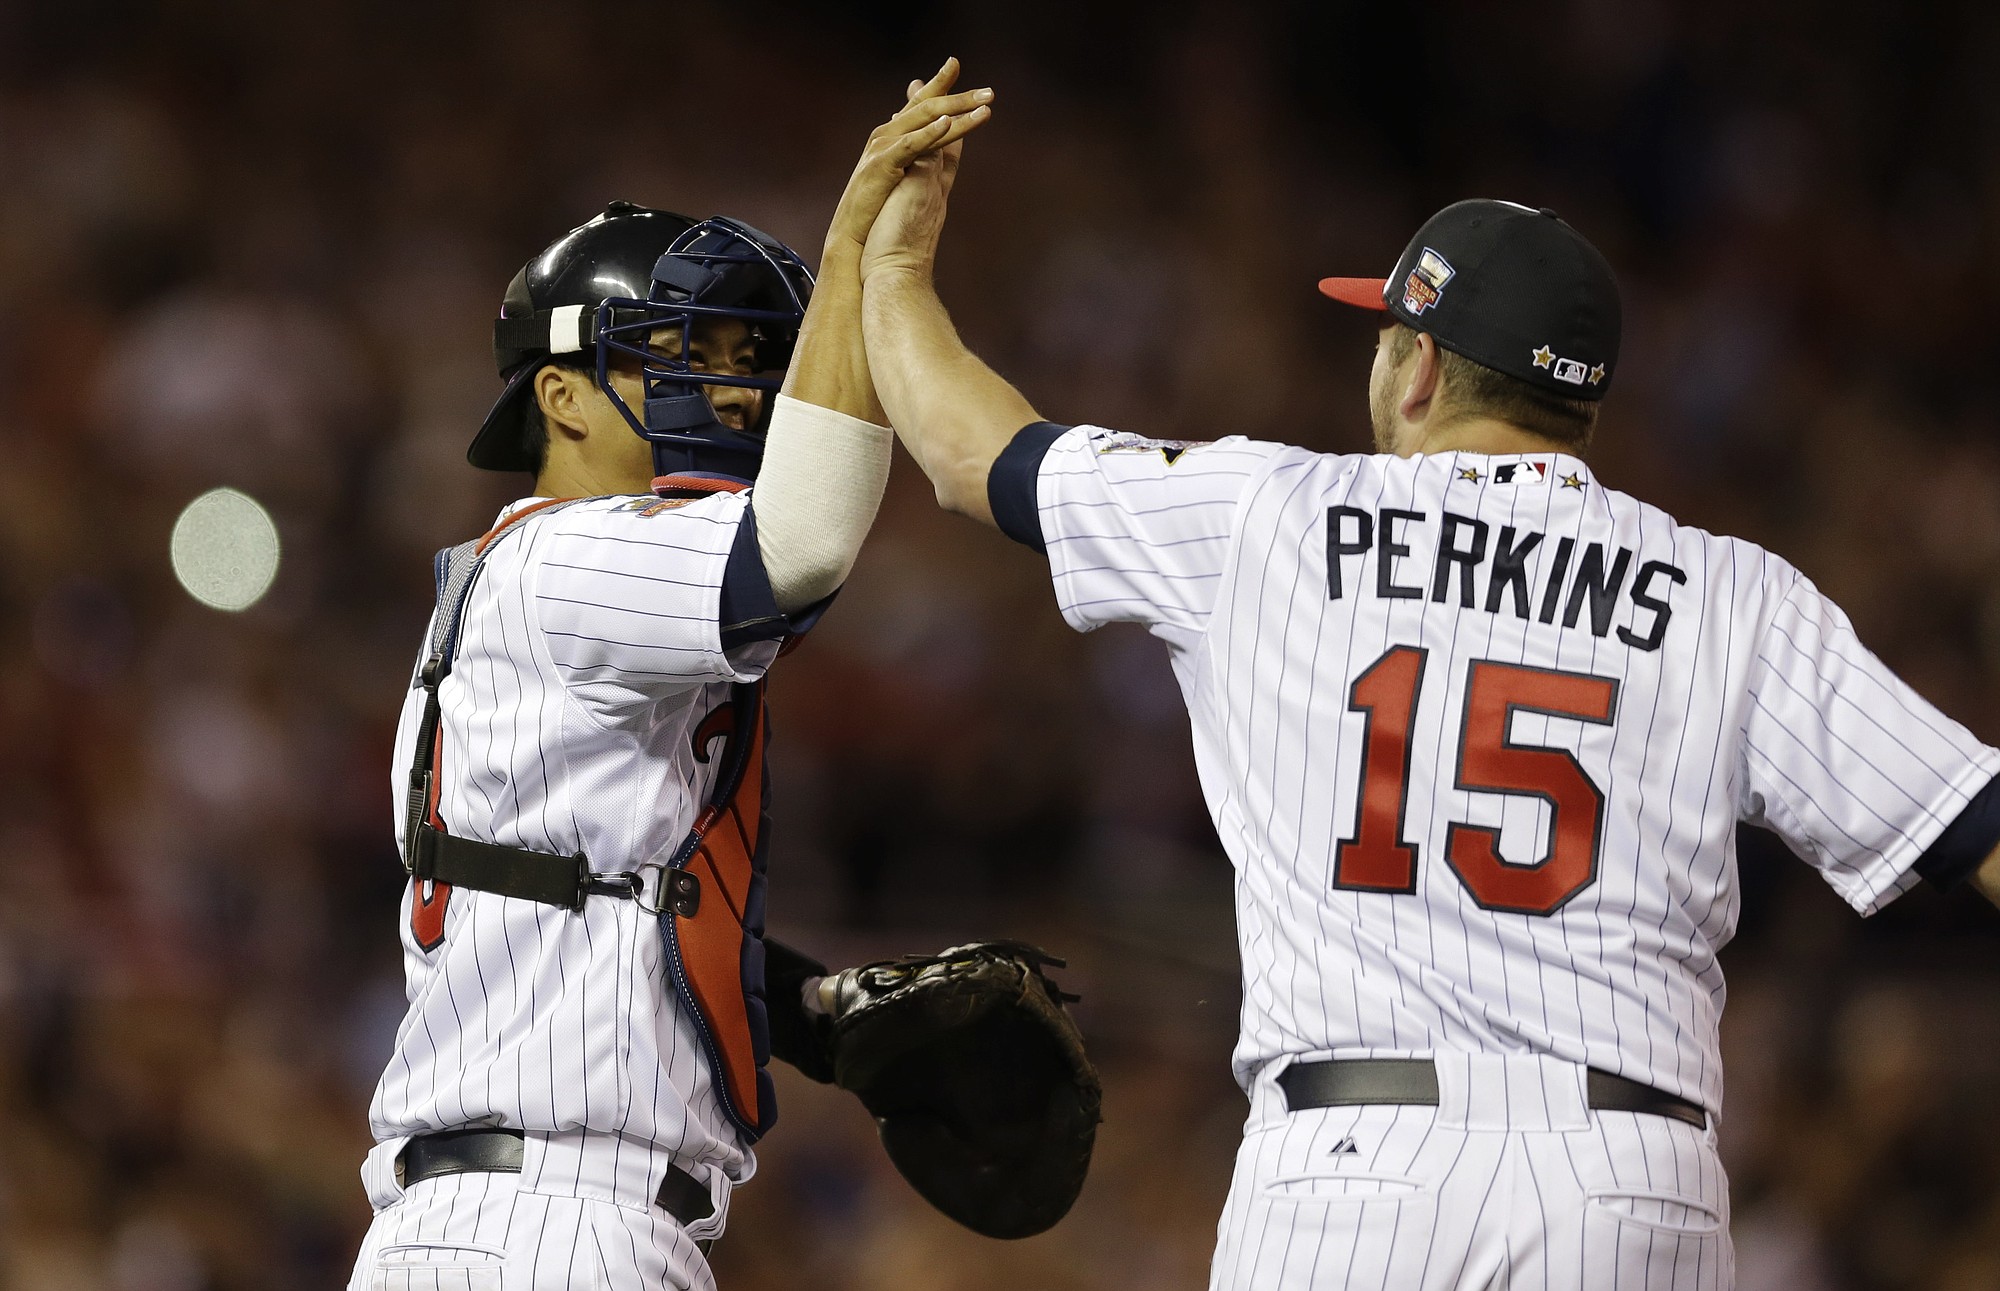 American League catcher Kurt Suzuki, of the Minnesota Twins, celebrates with American League pitcher pitcher Glen Perkins, of the Minnesota Twins, after their 5-3 victory in the MLB All-Star Game, Tuesday, July 15, 2014, in Minneapolis.